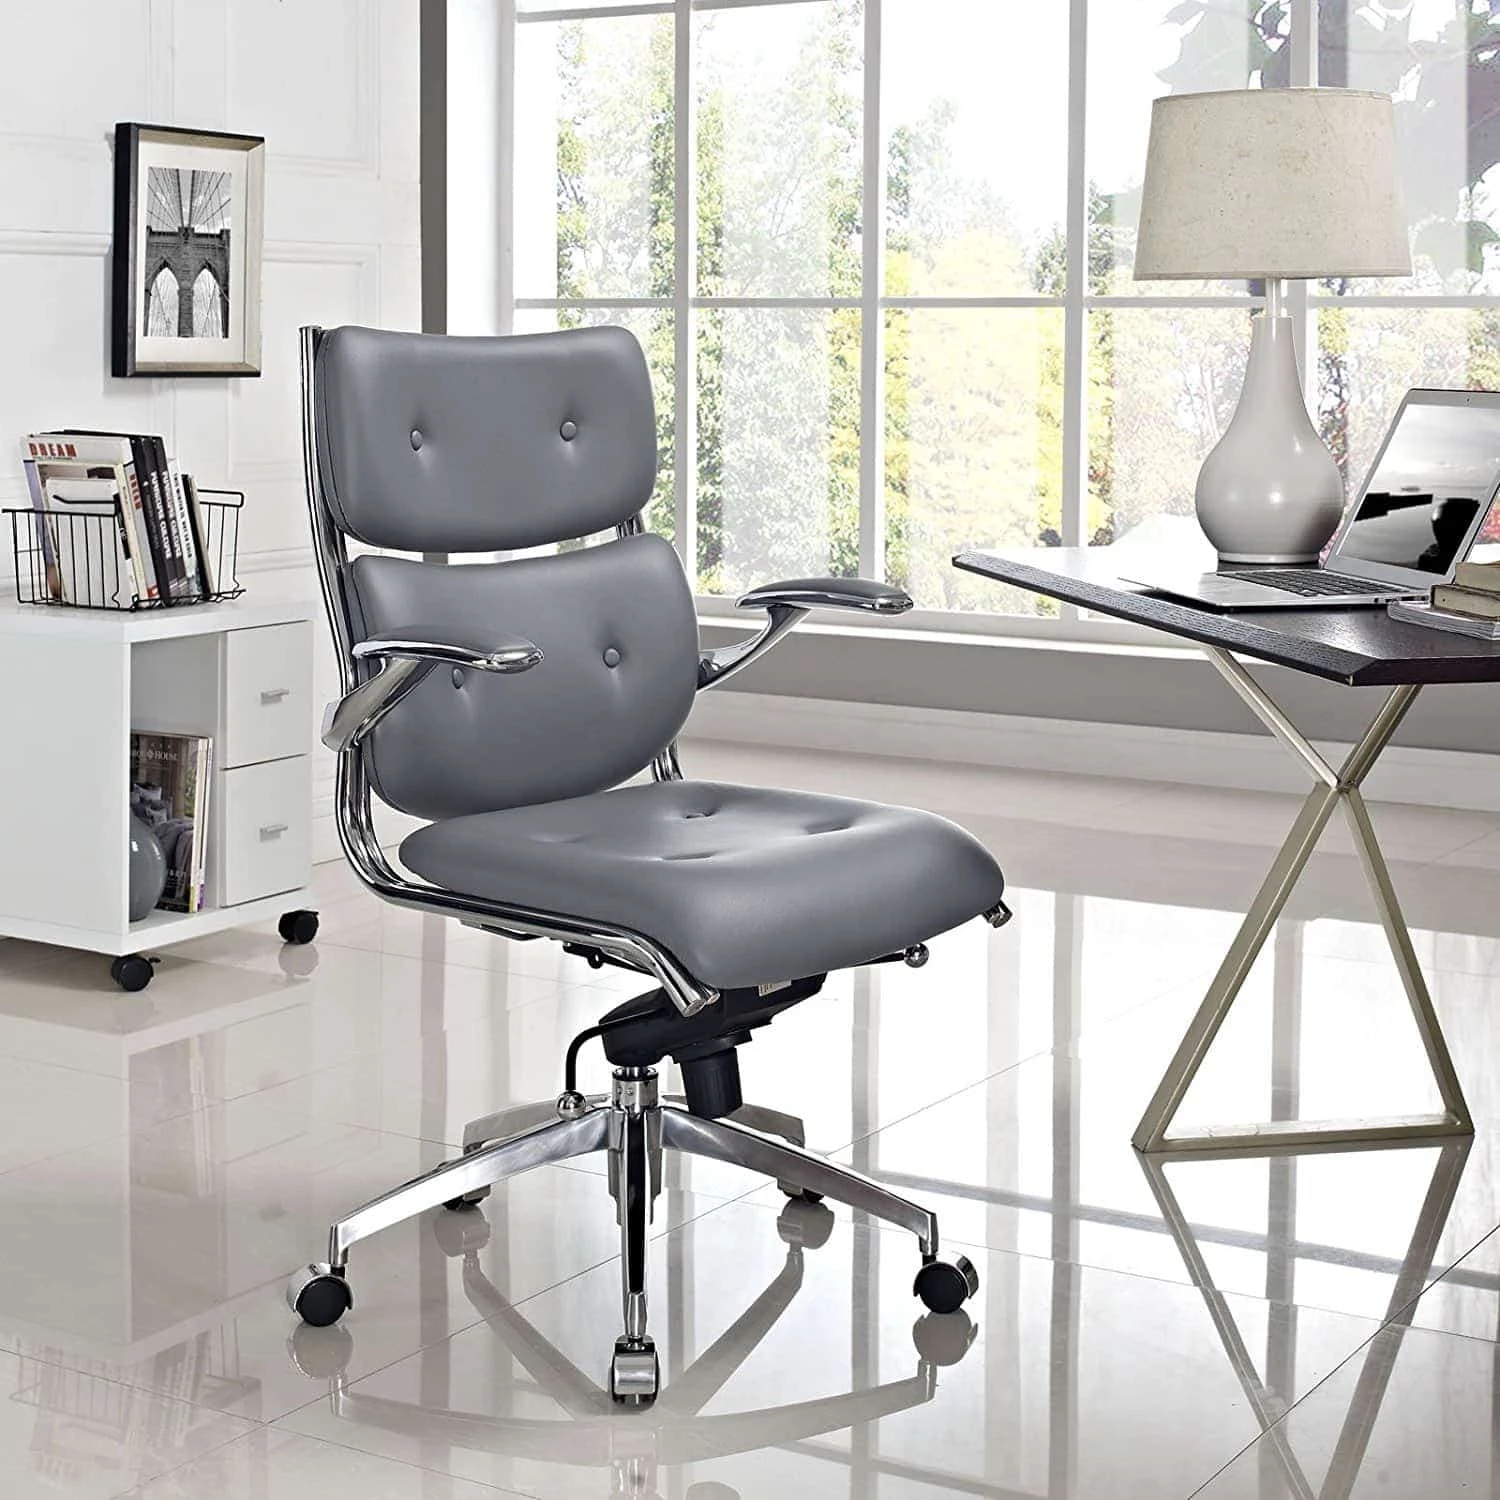 Snag This Look - Industrial Home Office with a Soft Twist - Learn how to create a warm and inviting Industrial style decor home office - Desk Chair